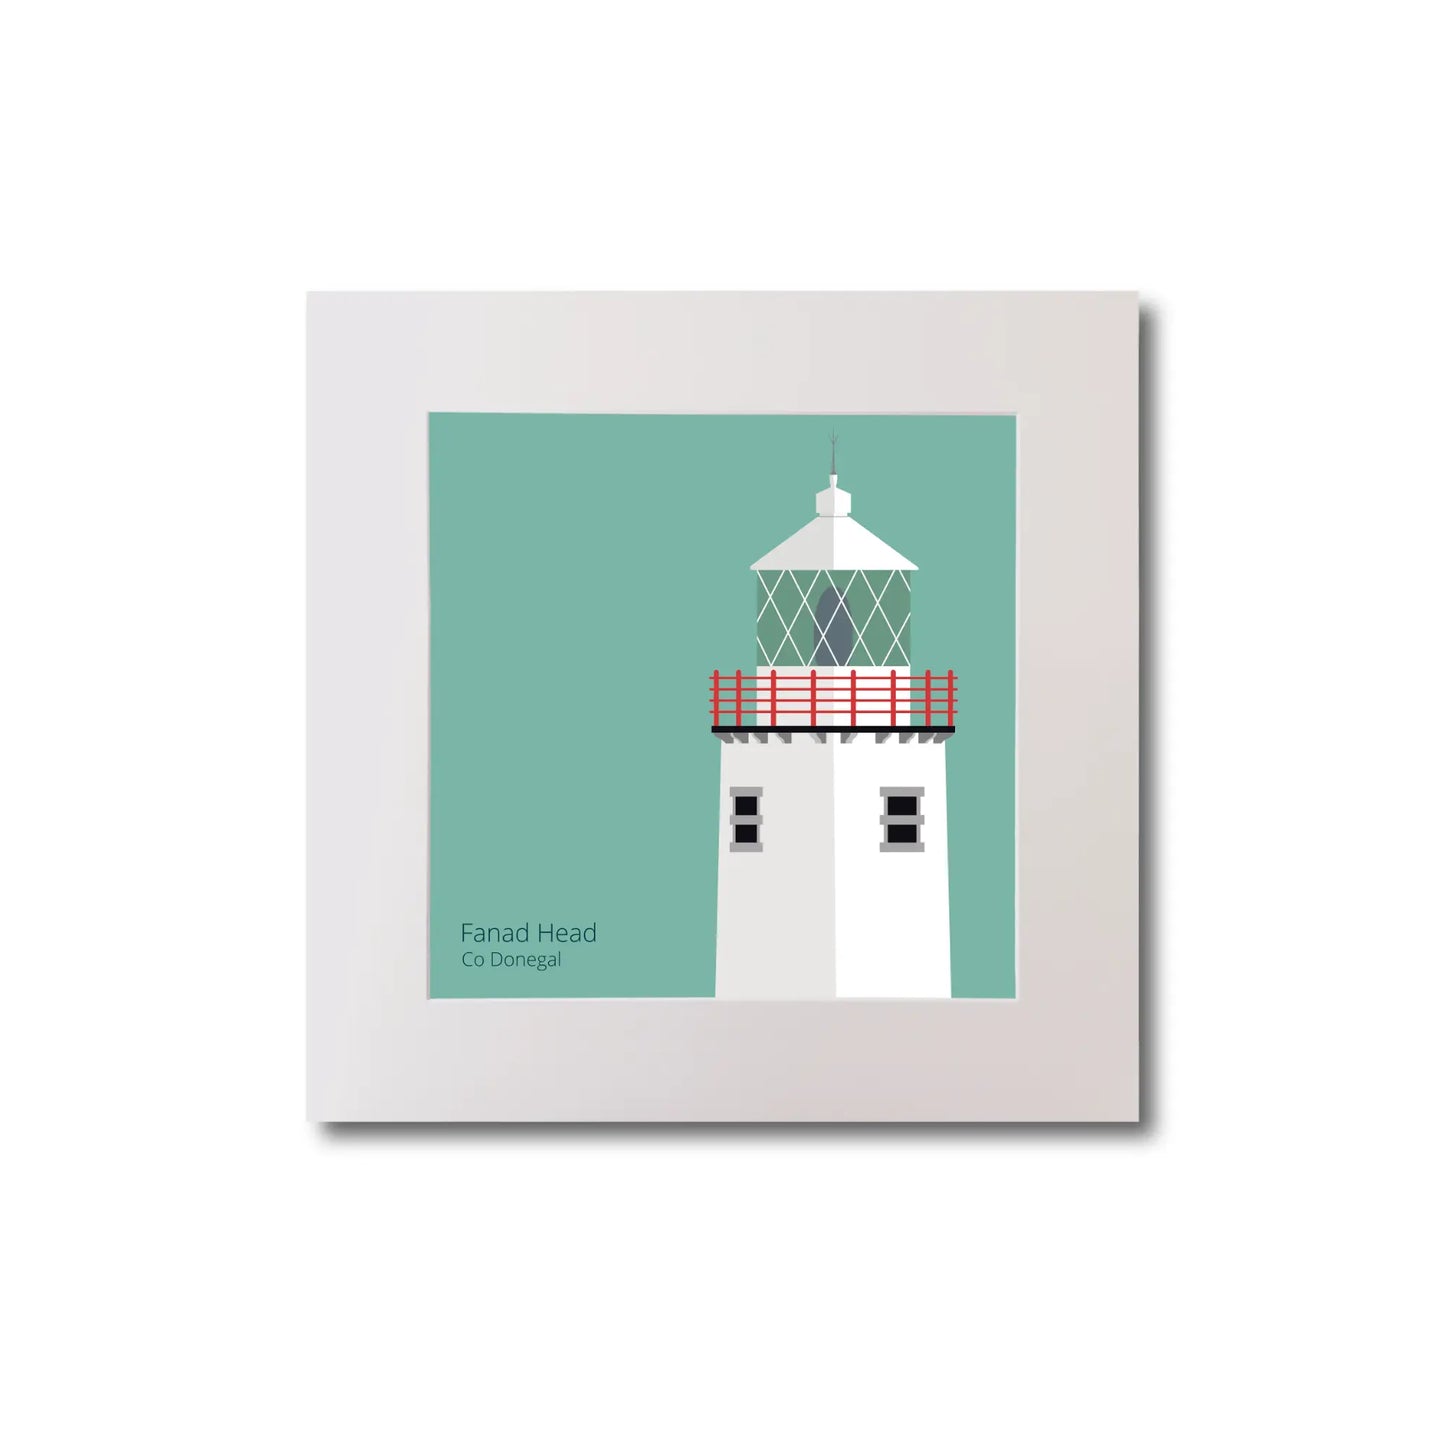 Illustration of Fanad Head lighthouse on an ocean green background, mounted and measuring 20x20cm.